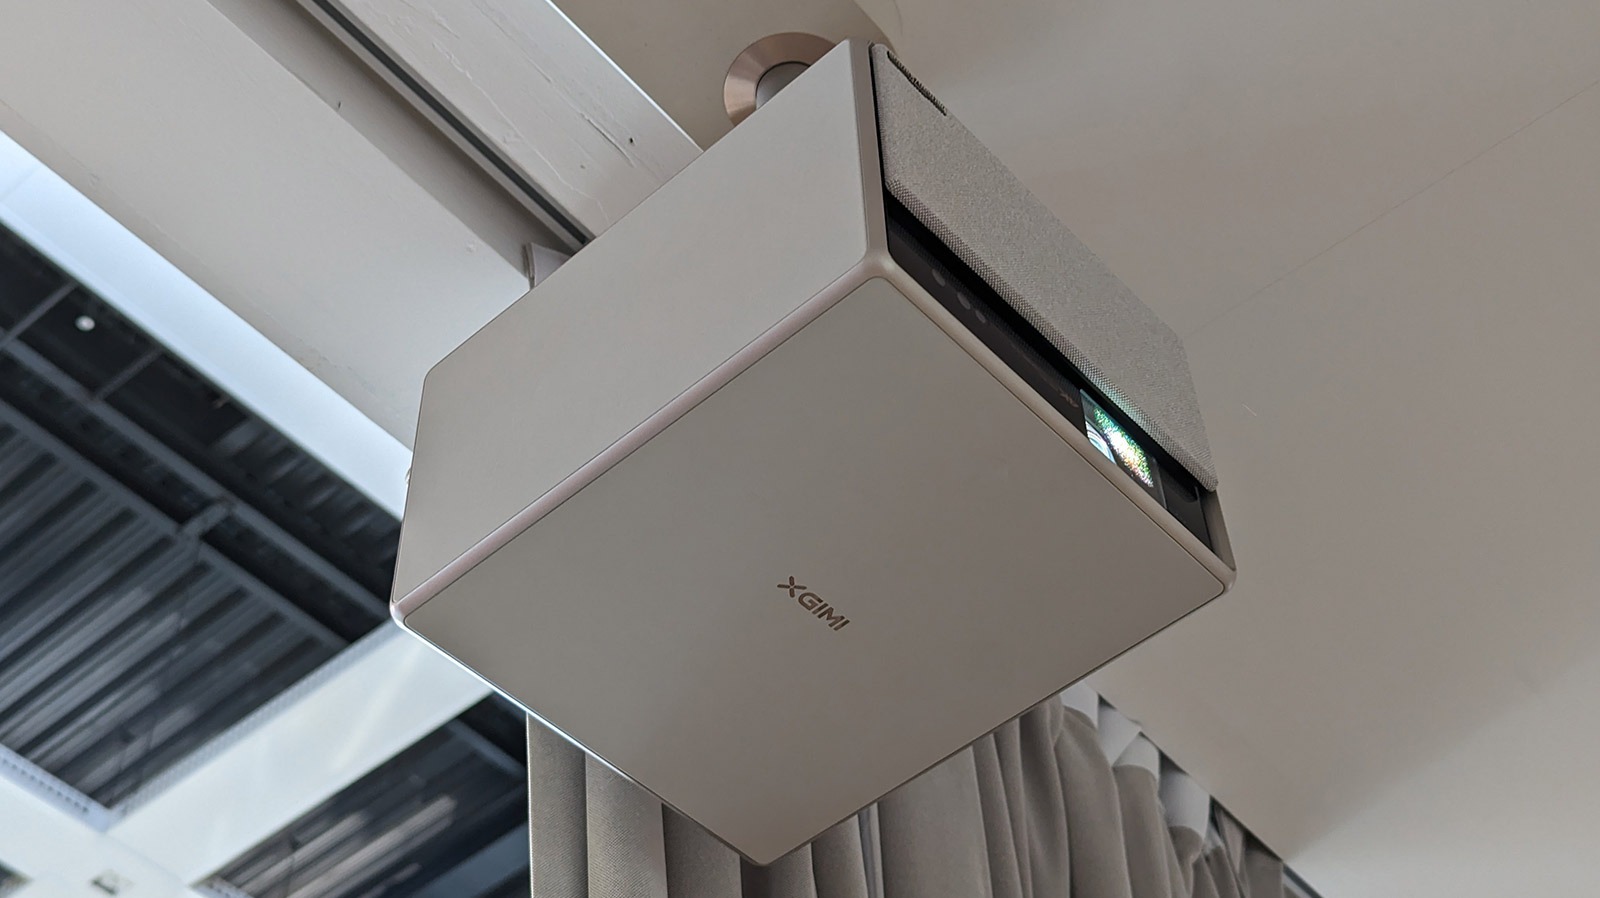 Xgimi's Horizon Ultra 4K Projector Promises Dolby Vision HDR At An